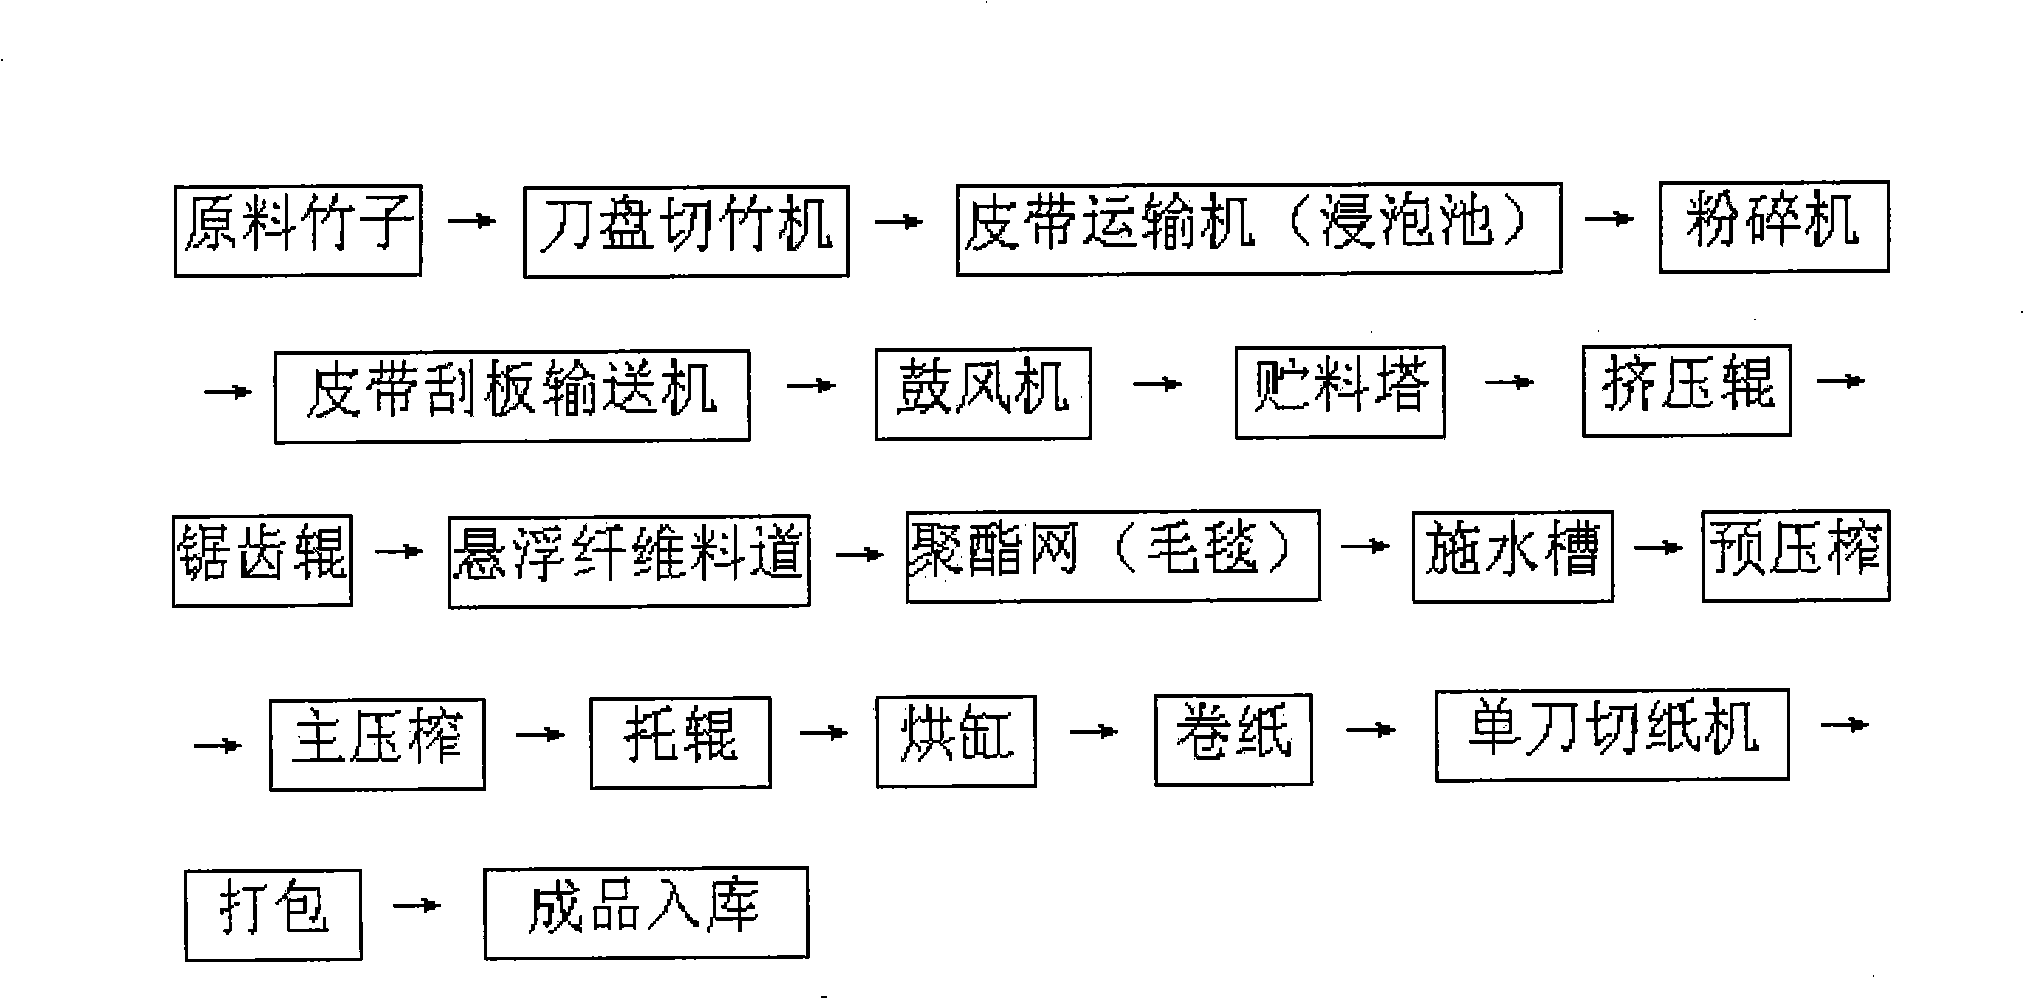 Method for making hand-made paper by dry method